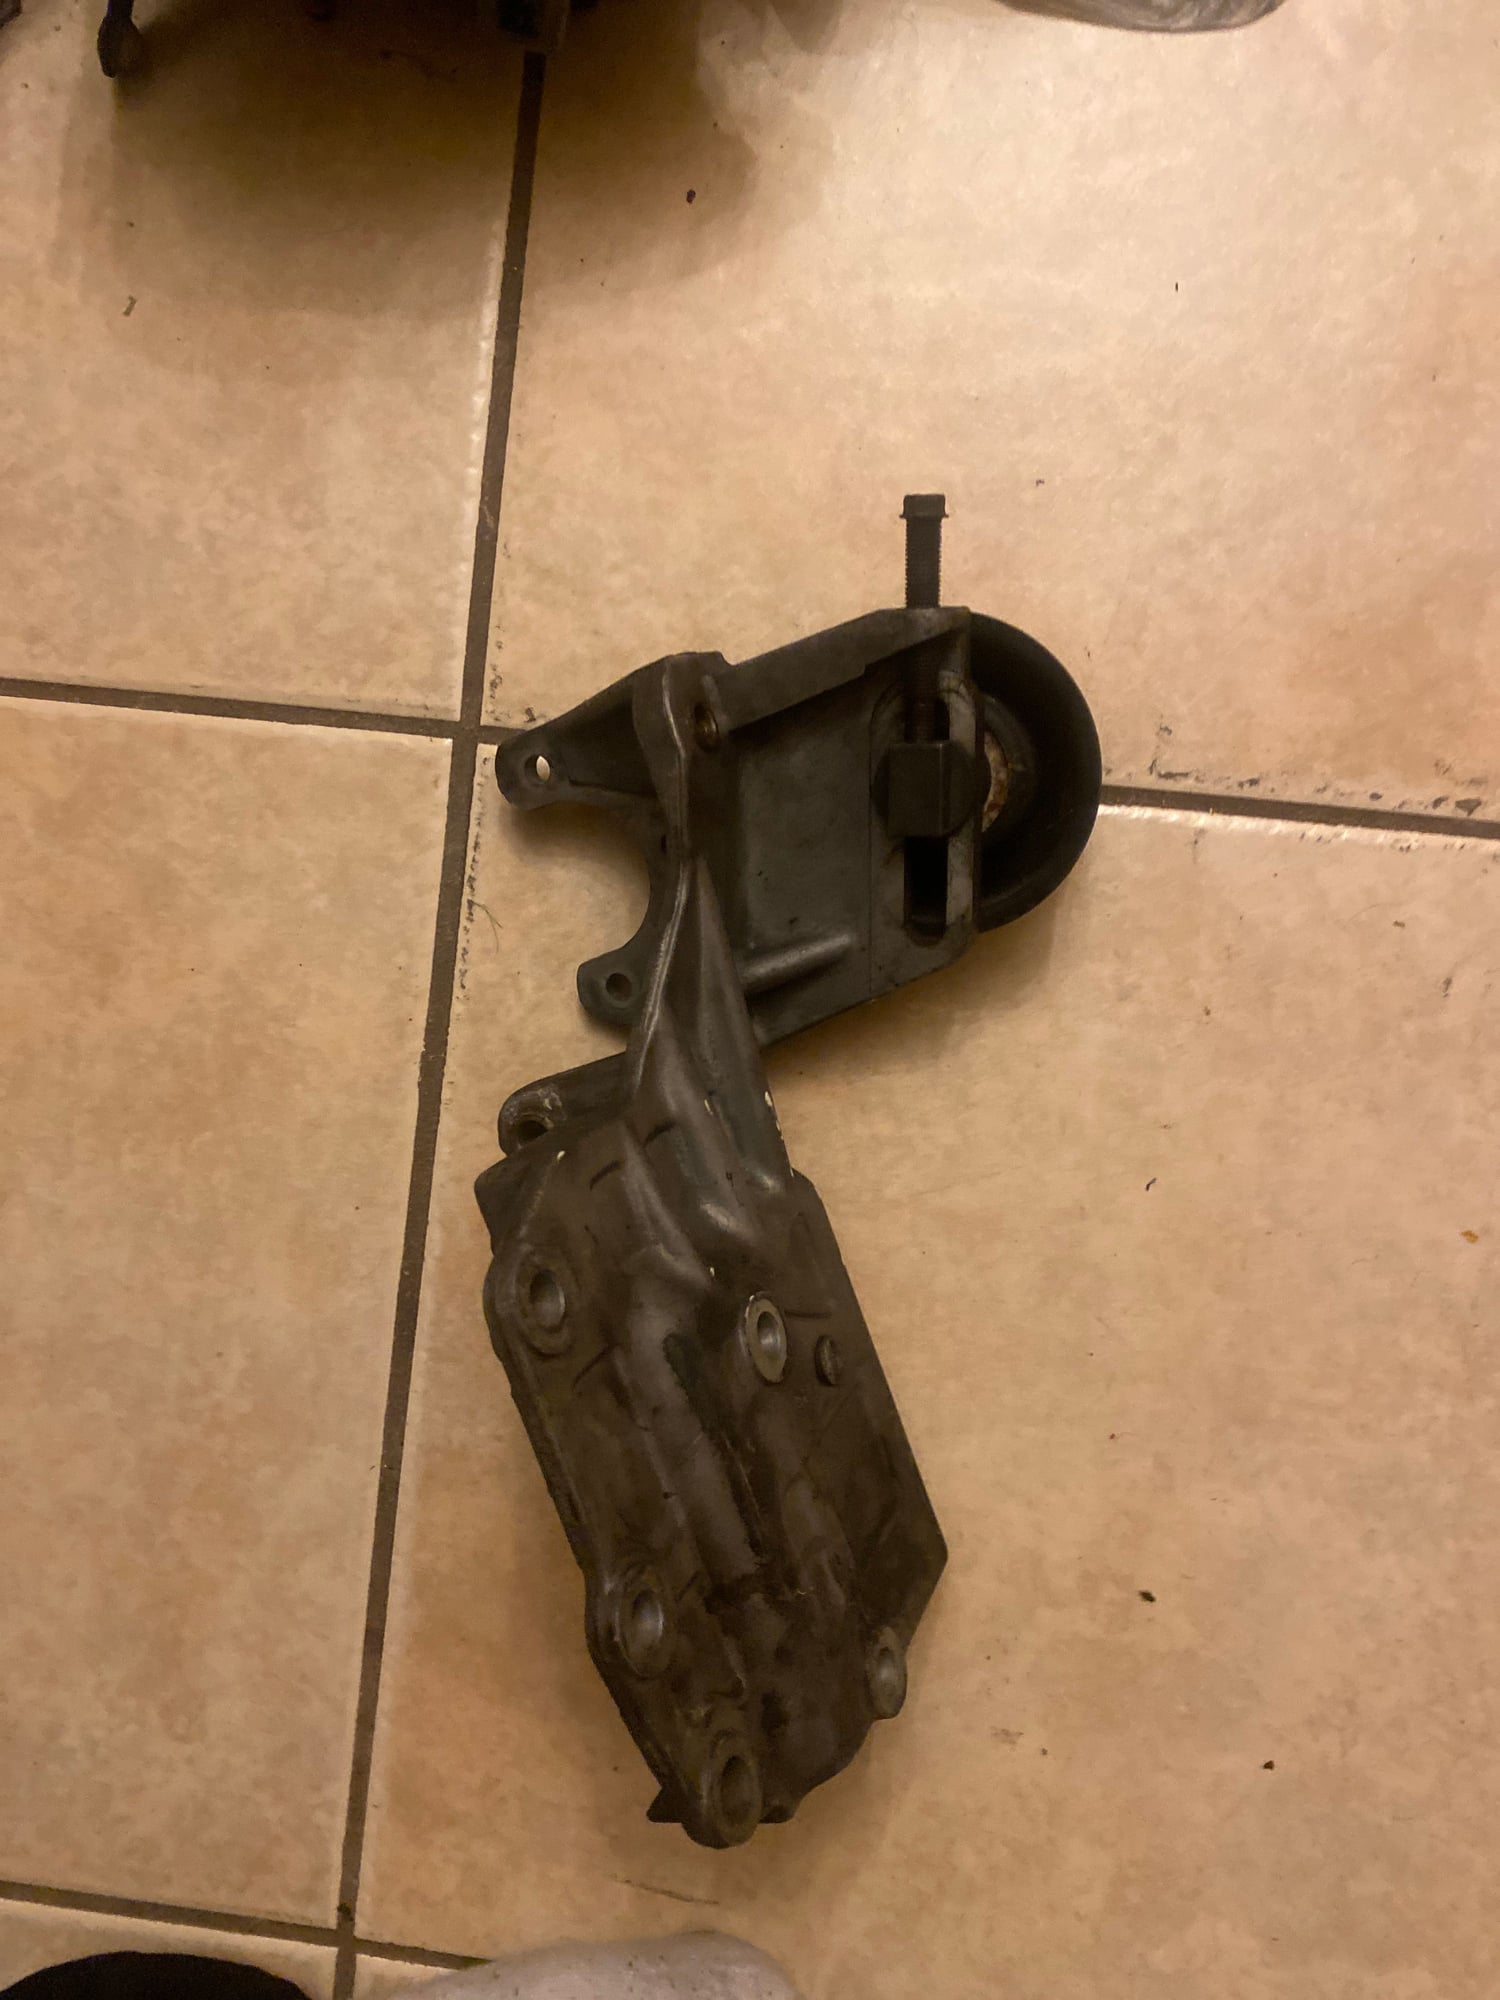 Miscellaneous - Fd rx7 ac power steering bracket - Used - 1993 to 2002 Mazda RX-7 - Miami, FL 33173, United States